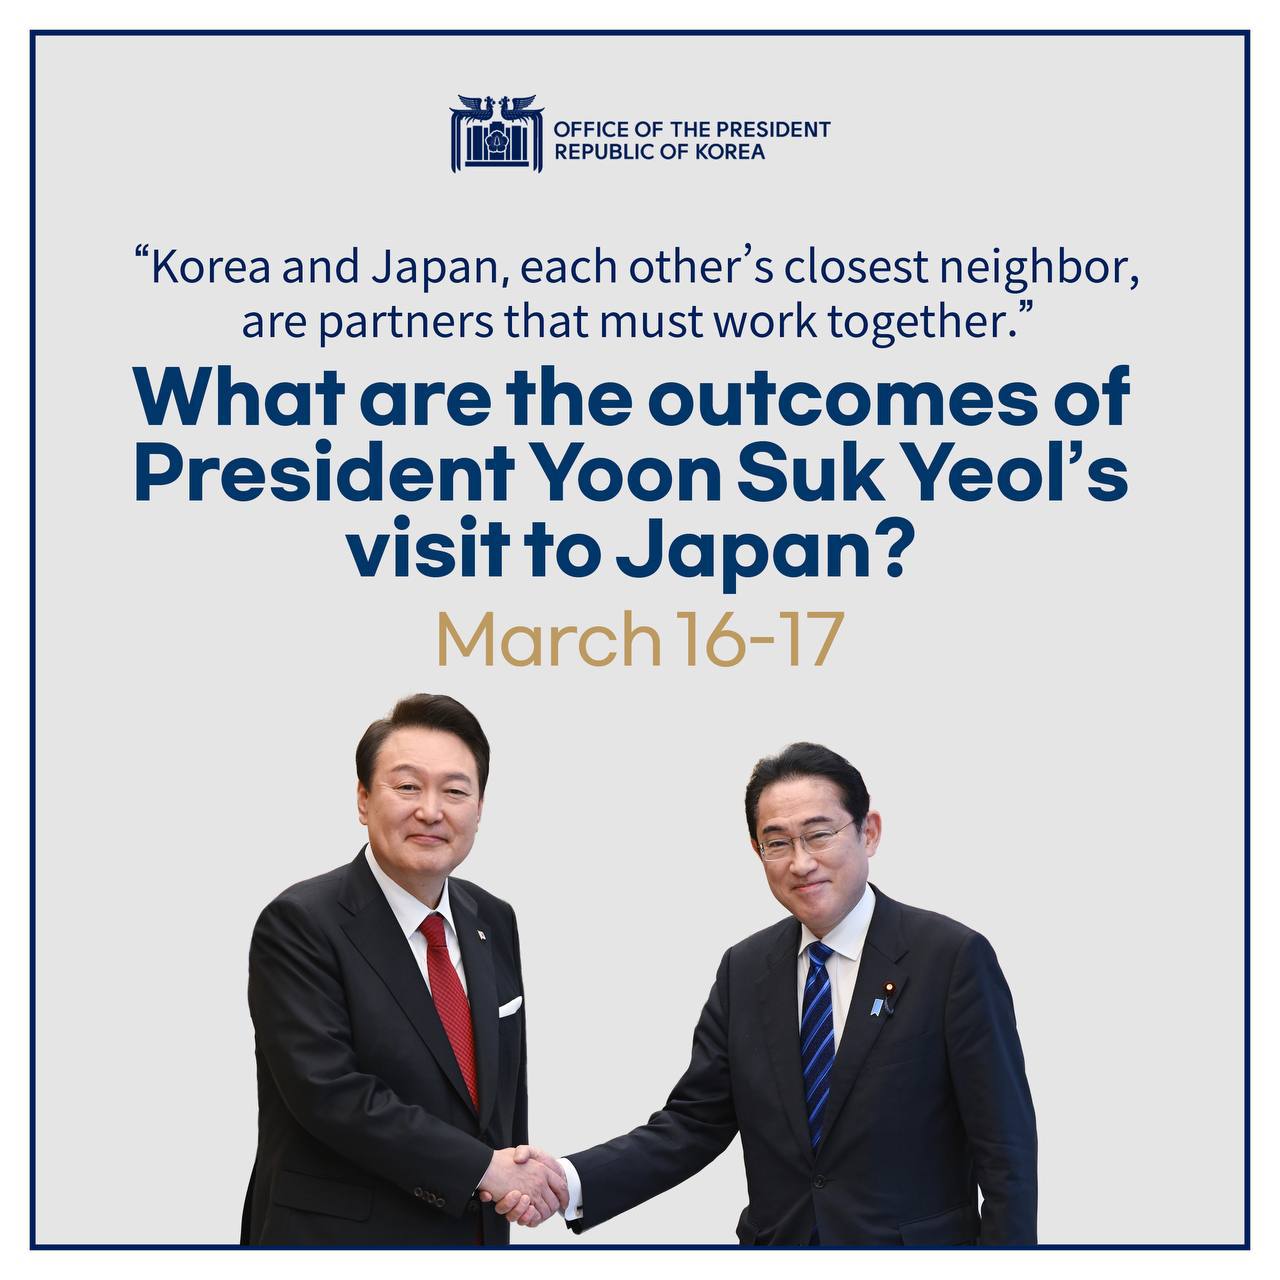 Two-day Visit to Japan, Korea's Closest Neighbor, Brings Cooperation for the Economy, Security and Future Generations Slide1